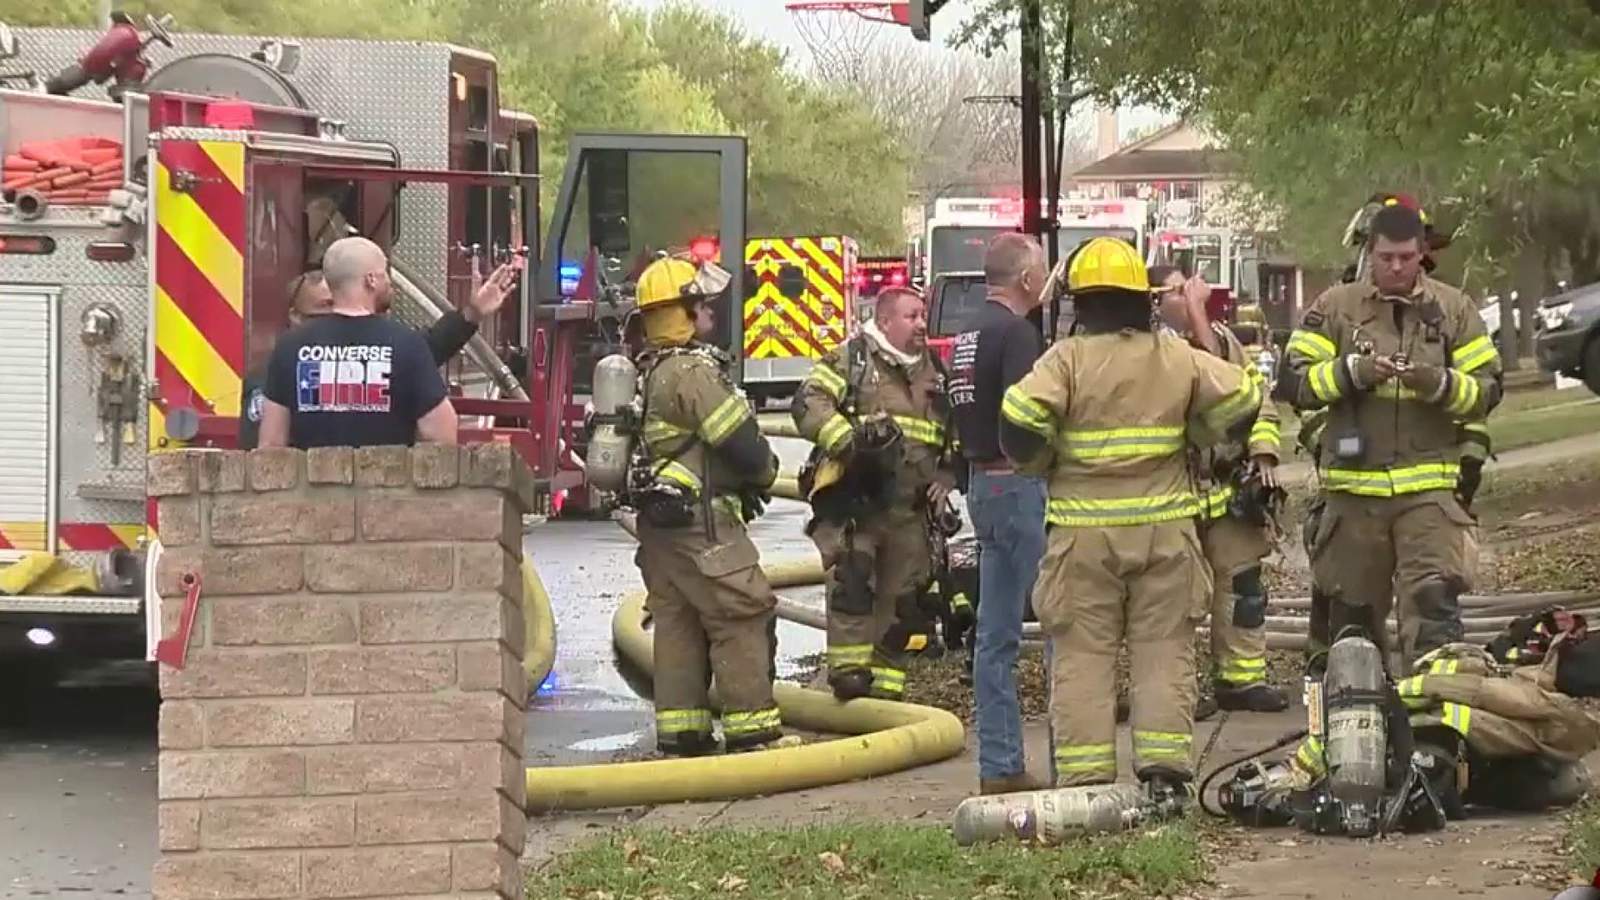 Converse family displaced after lightning strike sets home on fire, firefighters say